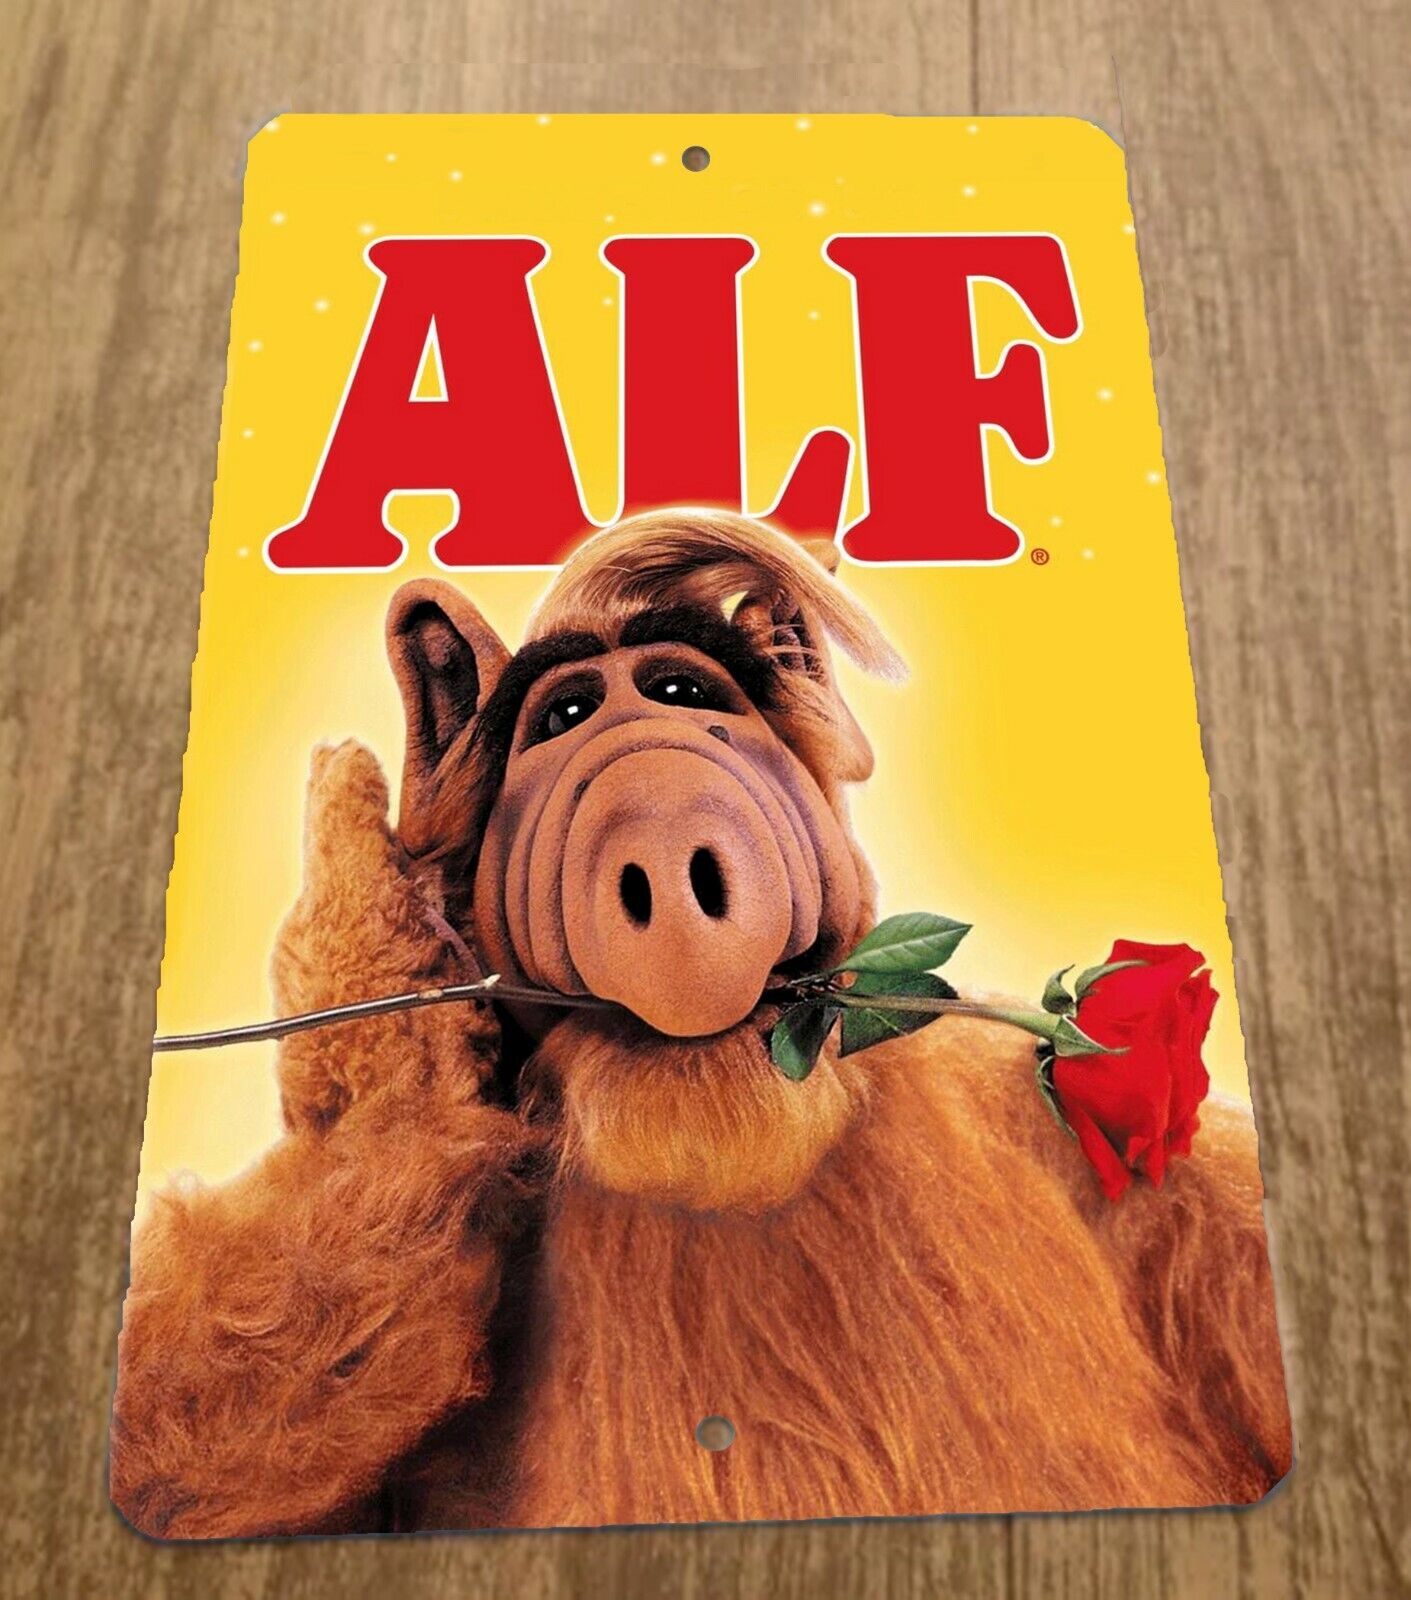 ALF TV Show Alien Life From 8x12 Metal Wall Sign